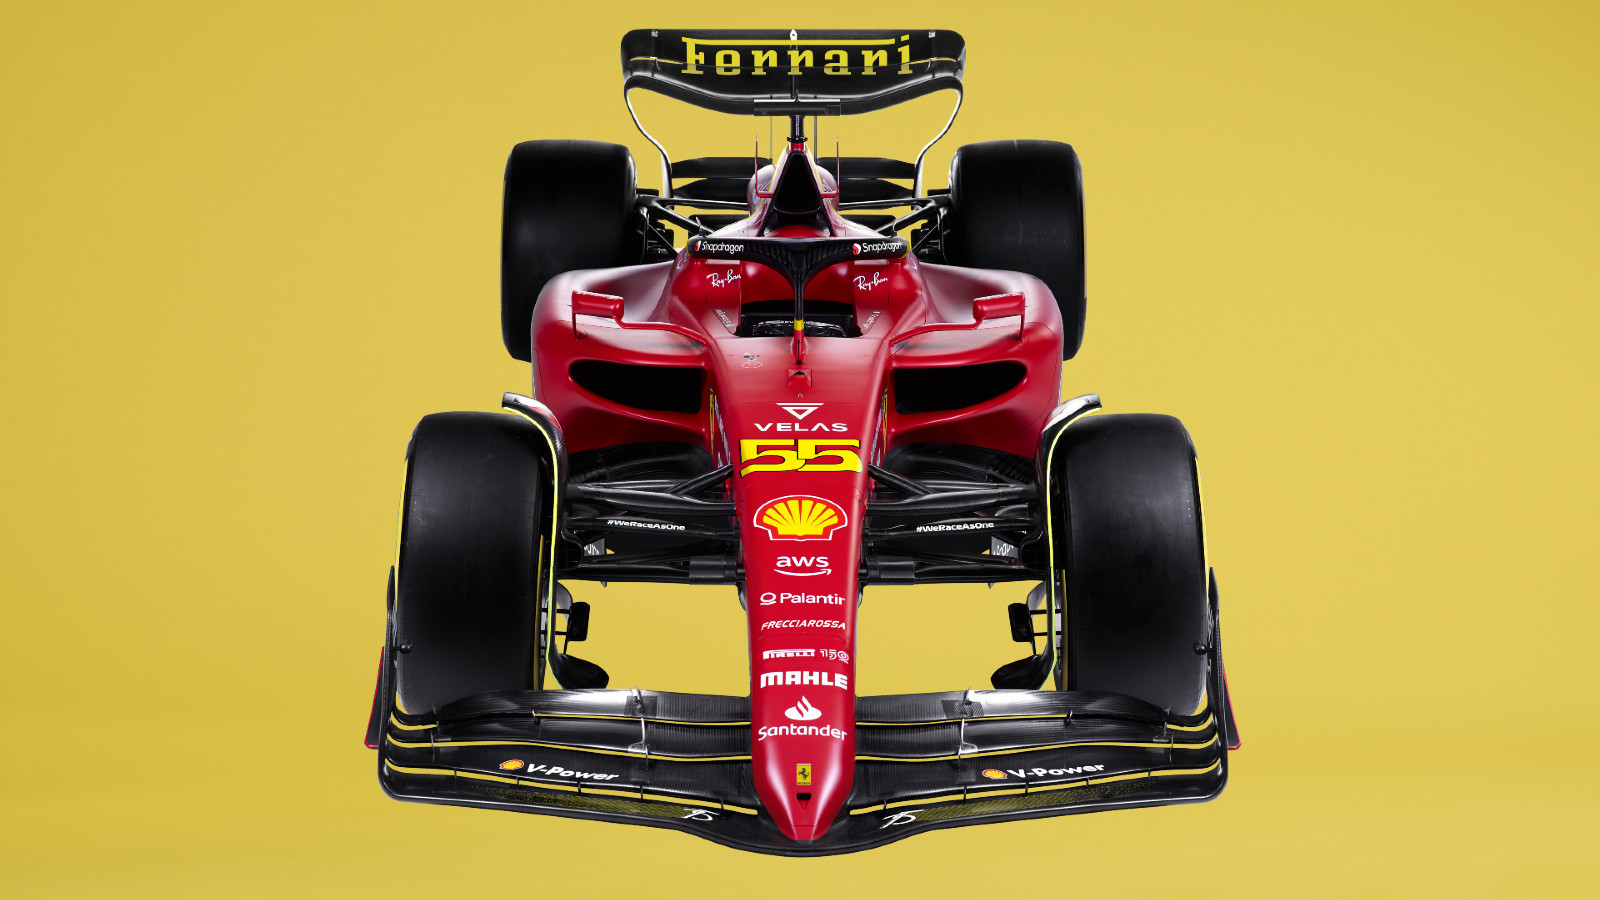 Ferrari's F1-75 shown off in a yellow-tweaked livery for the Italian Grand Prix weekend. Monza, September 2022.